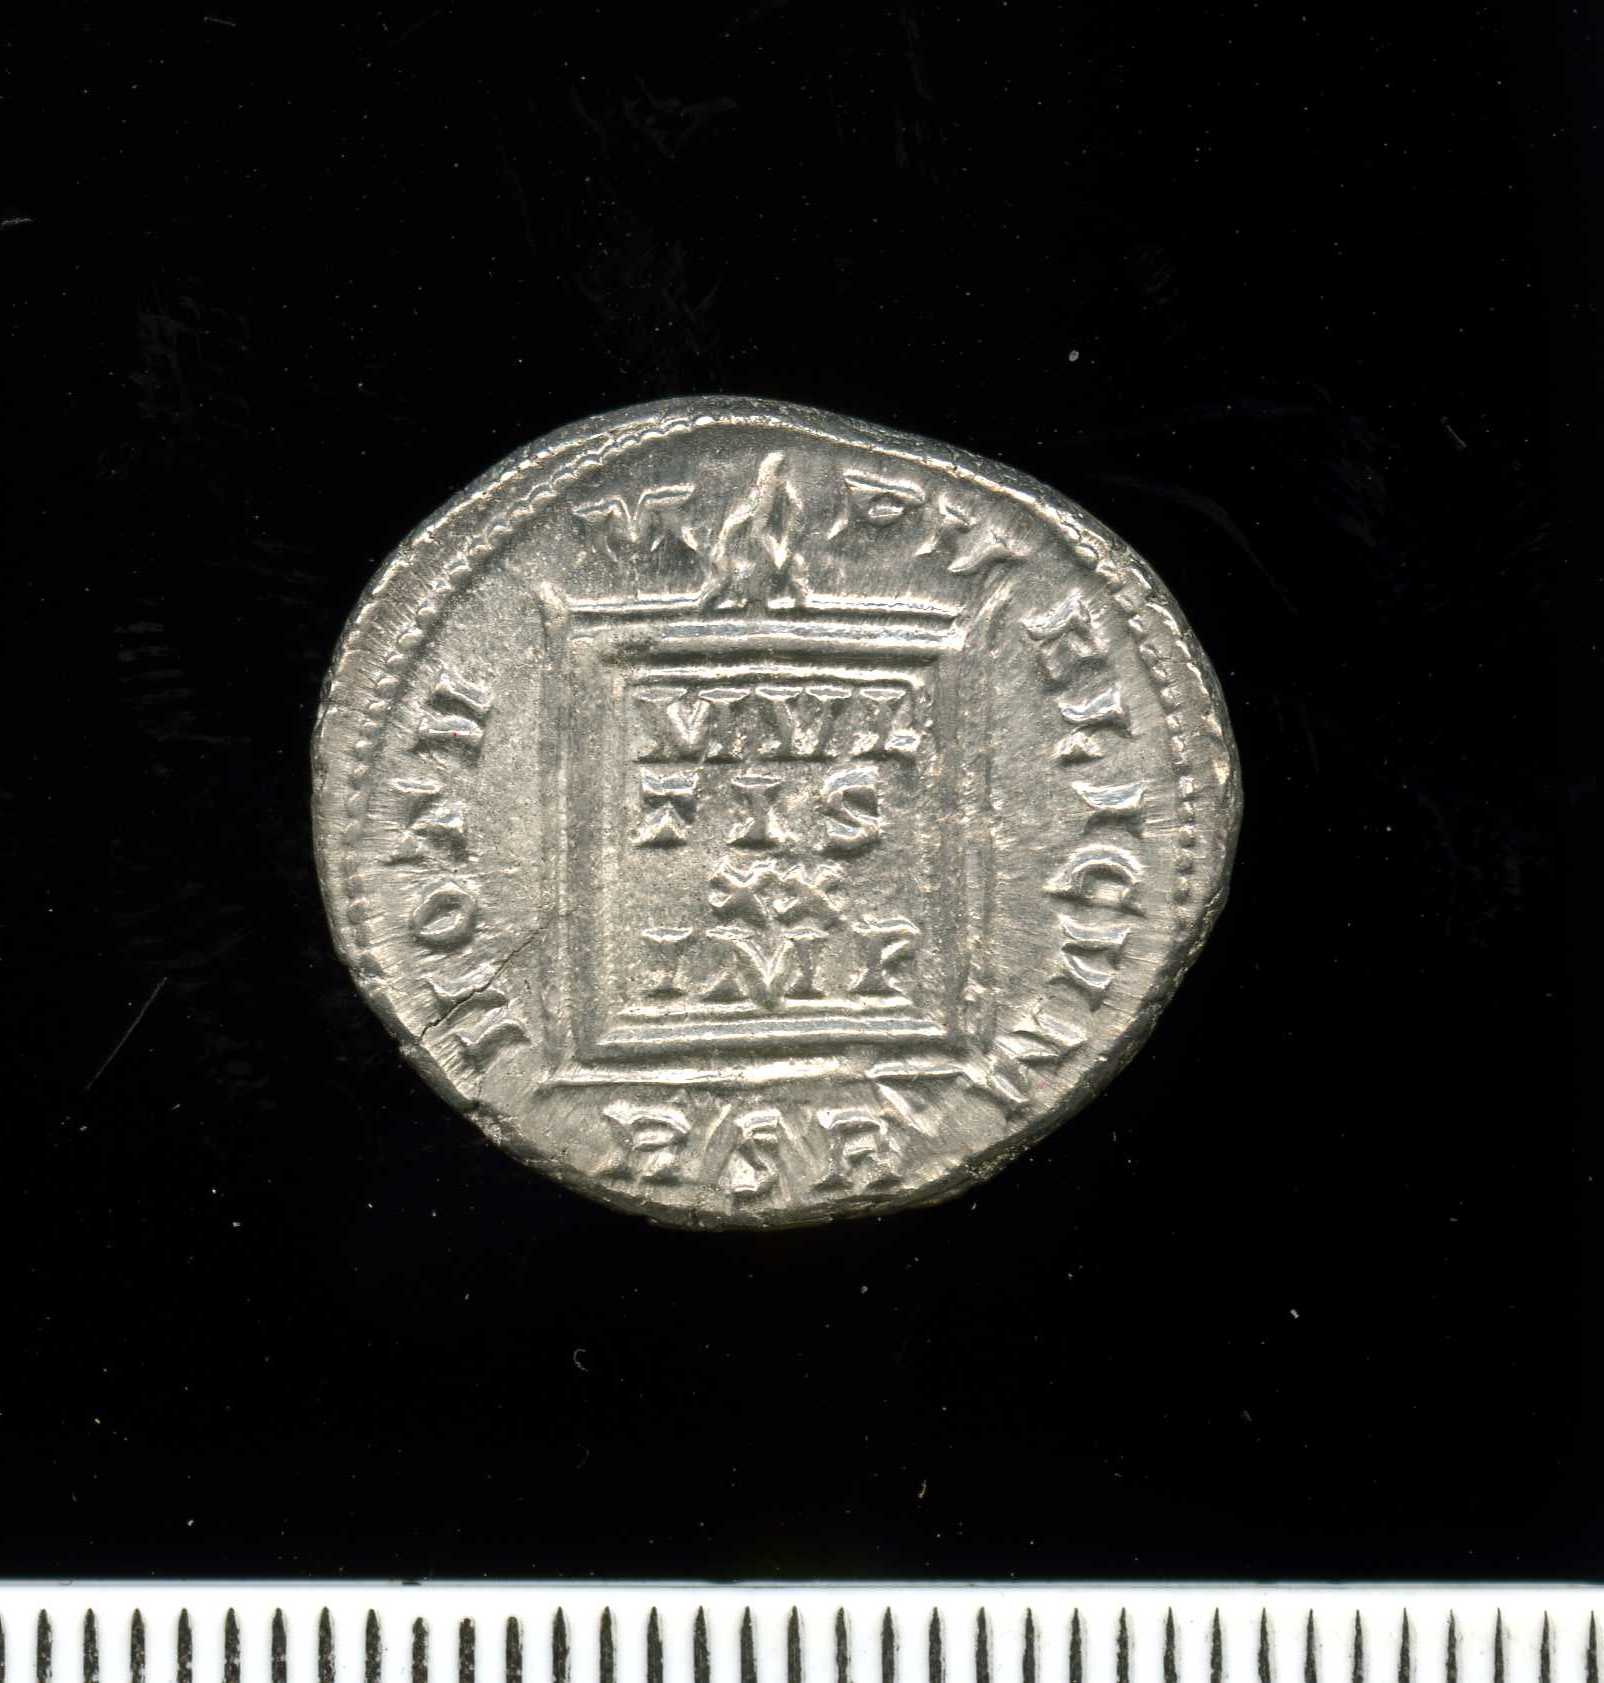 an antique coin, featuring the letter d